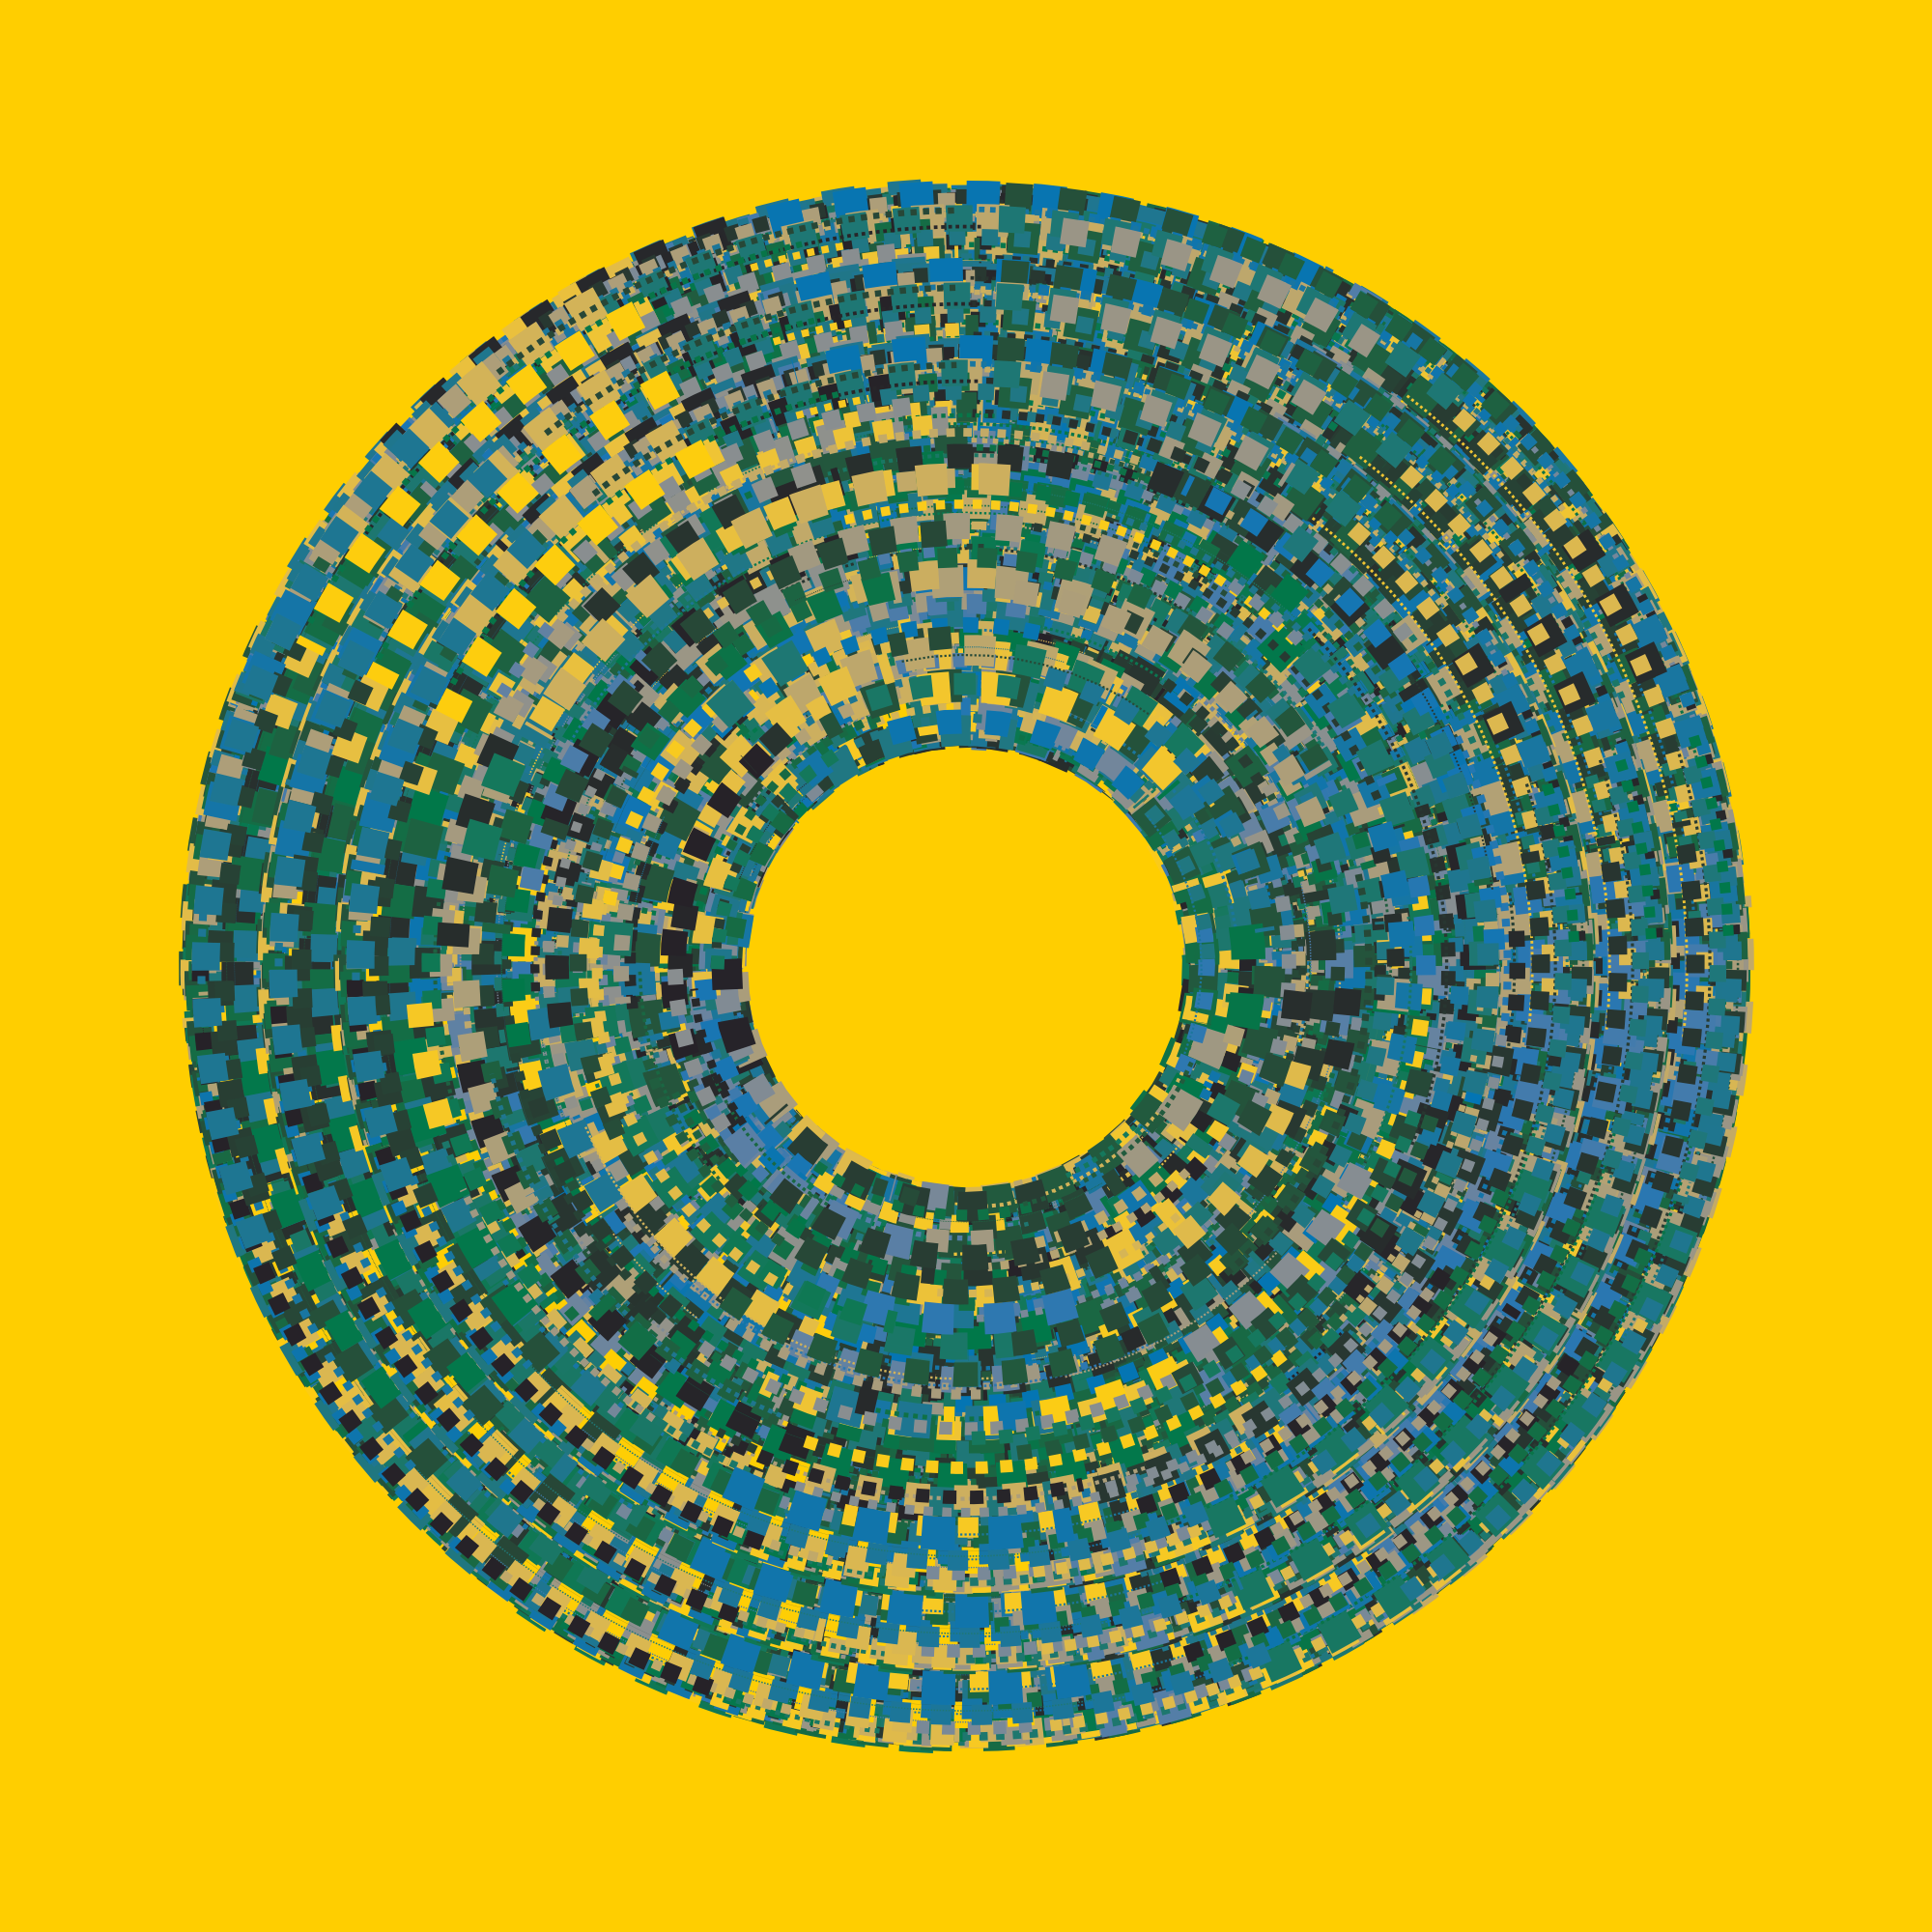 Many blue and yellow rectangles arranged in concentric circles